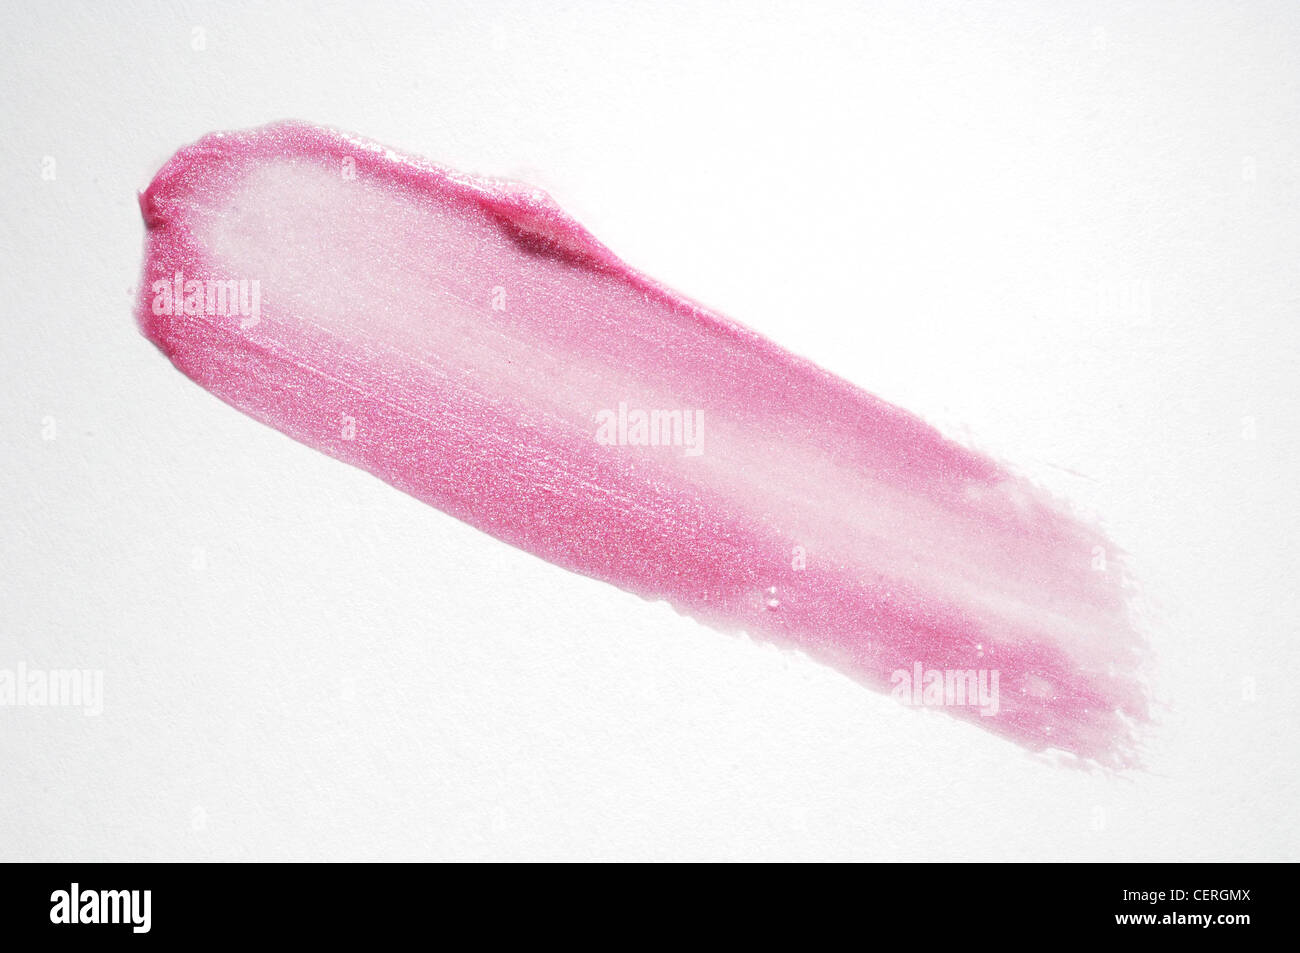 Smudge of pink lipgloss Stock Photo